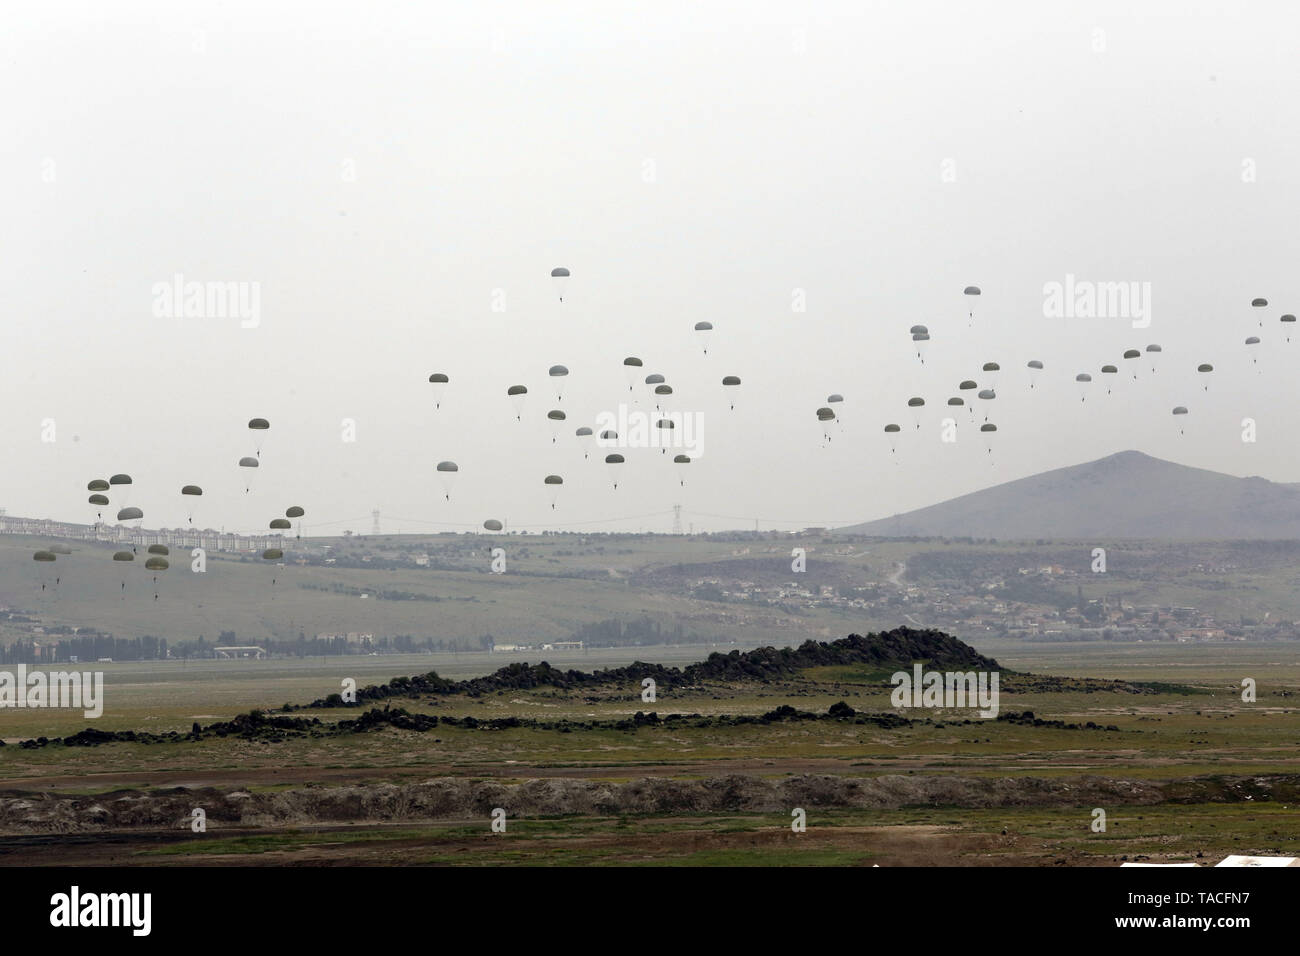 (190524) -- ANKARA, May 24, 2019 (Xinhua) -- Paratroopers take part in the 'Erciyes-2019' military drill in Keyseri, Turkey, on May 23, 2019. An international joint military drill named 'Erciyes-2019' was completed in Turkey's central province of Keyseri, Turkish National Defense Ministry announced on Thursday.     The drill conducted between May 6-23 was participated by seven allied countries, including Azerbaijan, the United States, Romania, Georgia, Pakistan, Qatar and Italy, the ministry said in a video posted on its website. (Xinhua) Stock Photo